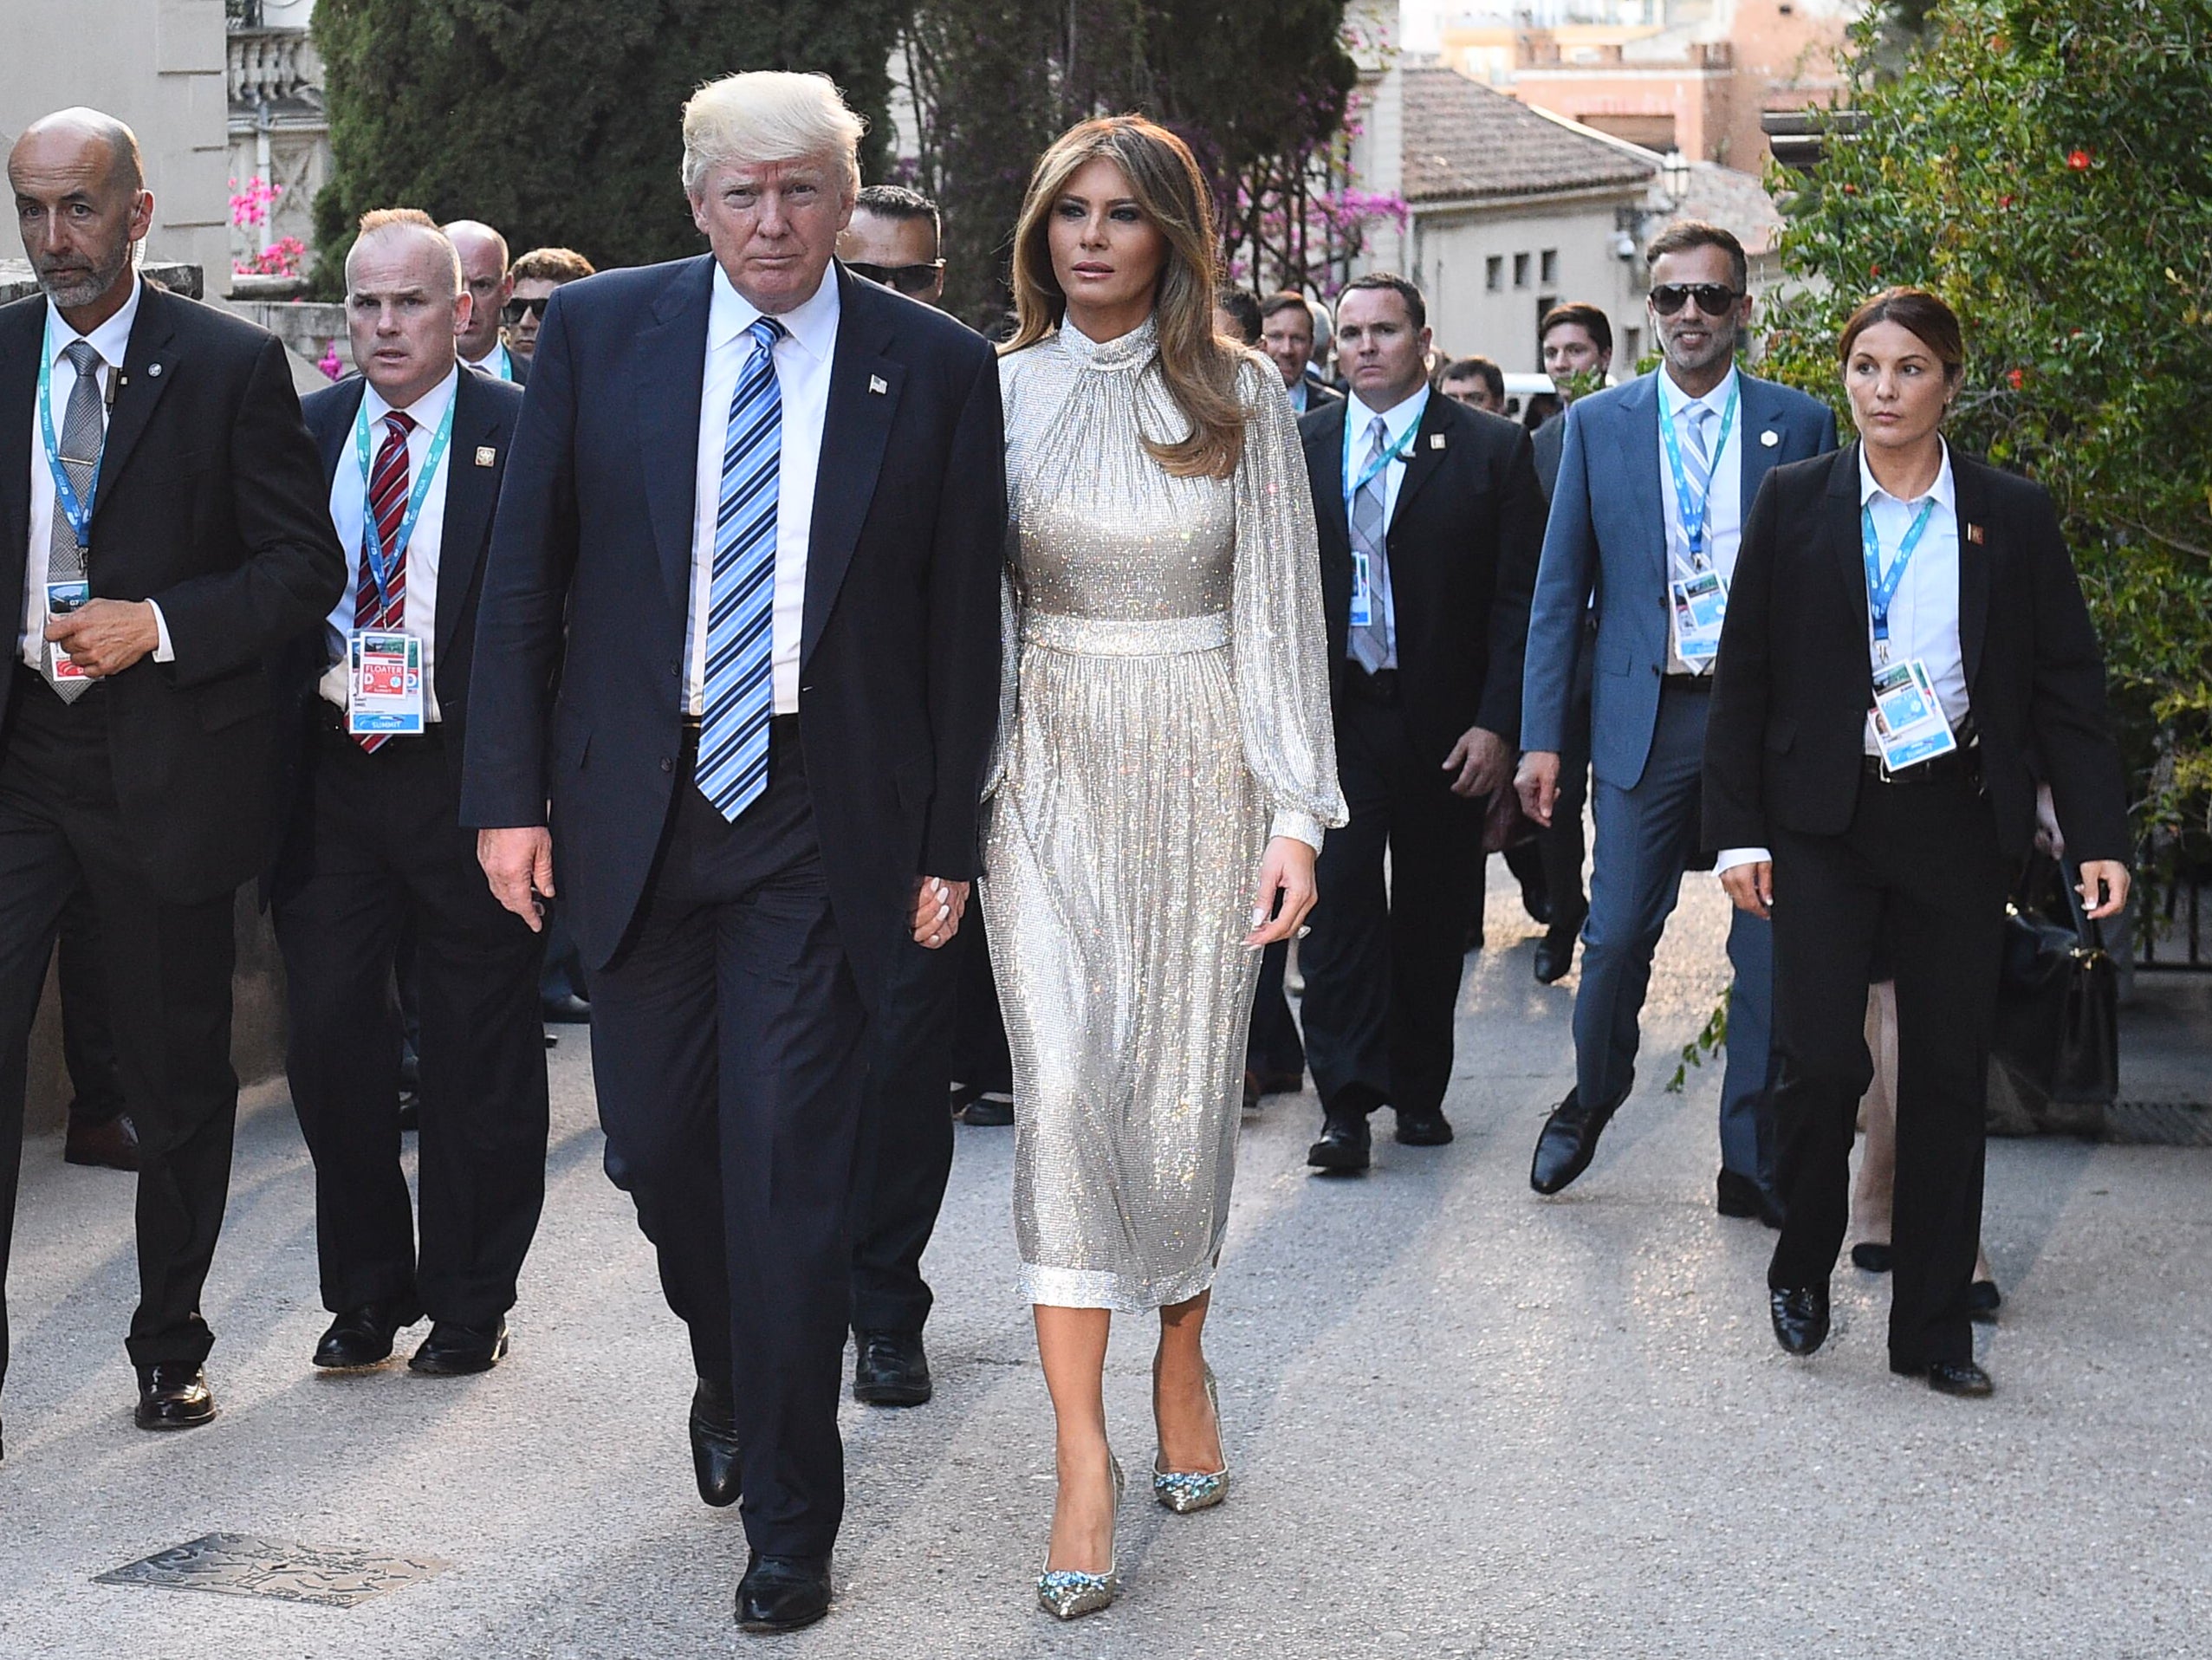 Donald Trump and Melania Trump during the 2017 G7 summit in Italy